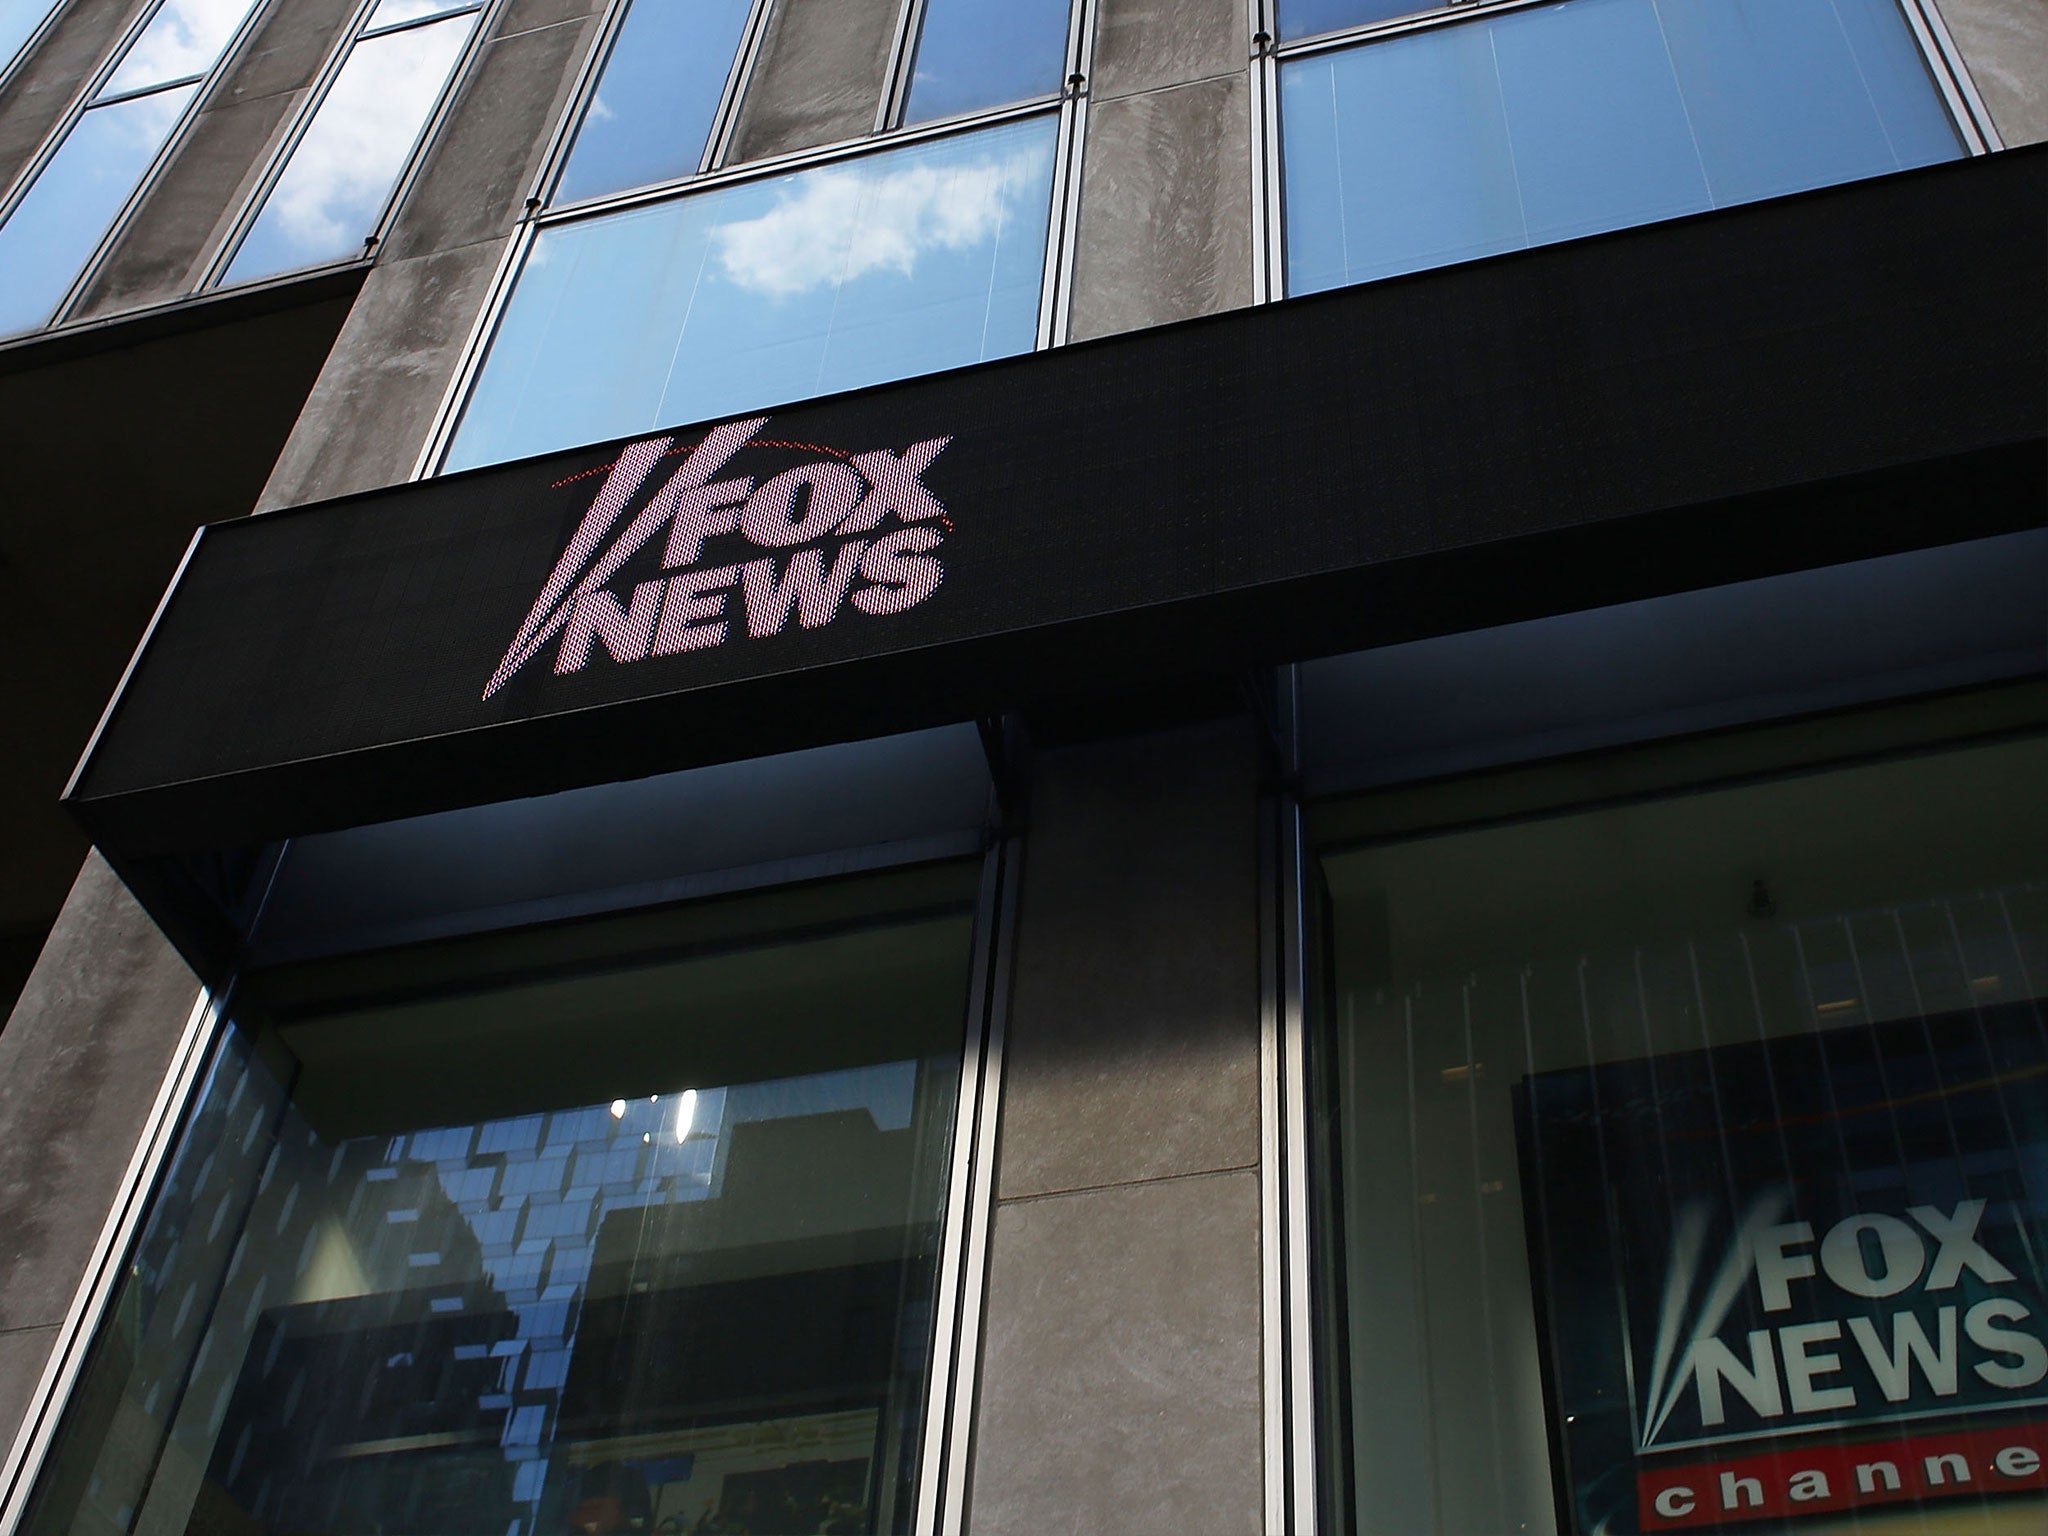 Fox News HQ in New York. The channel has been broadcasting in the UK for 15 years